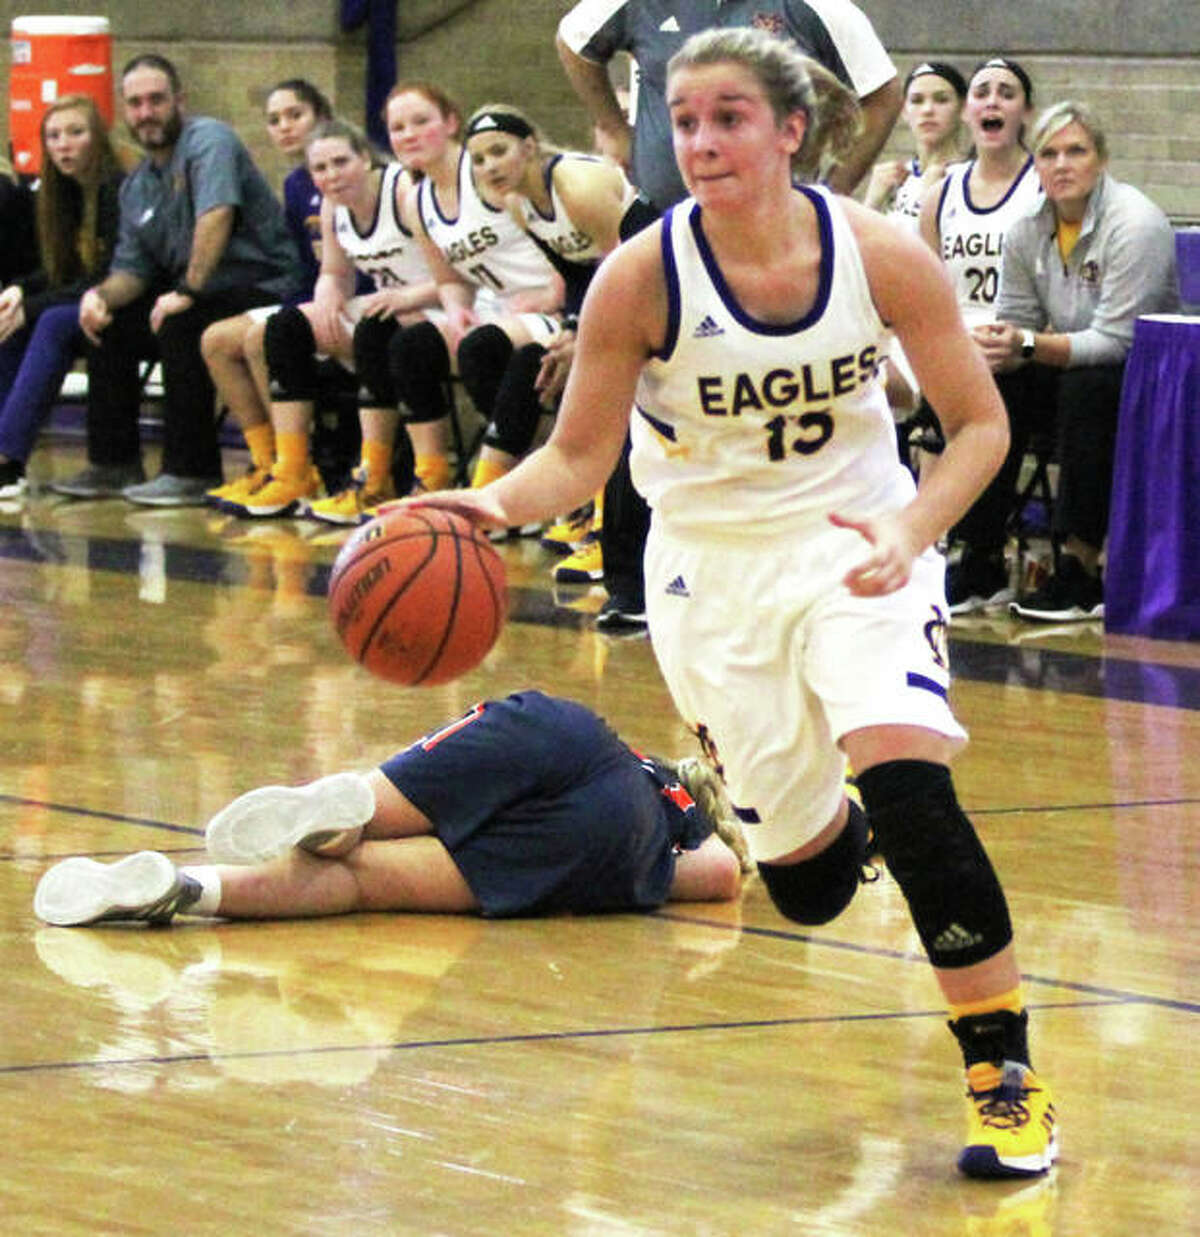 CM’s Harper Buhs, shown heading to the basket after stealing the basketball from fallen Rochester Rocket on Nov. 24 at the Taylorville Tourney, scored seven points Thursday night in the unbeaten Eagles’ 40-39 victory over Breese Mater Dei in Bethalto.